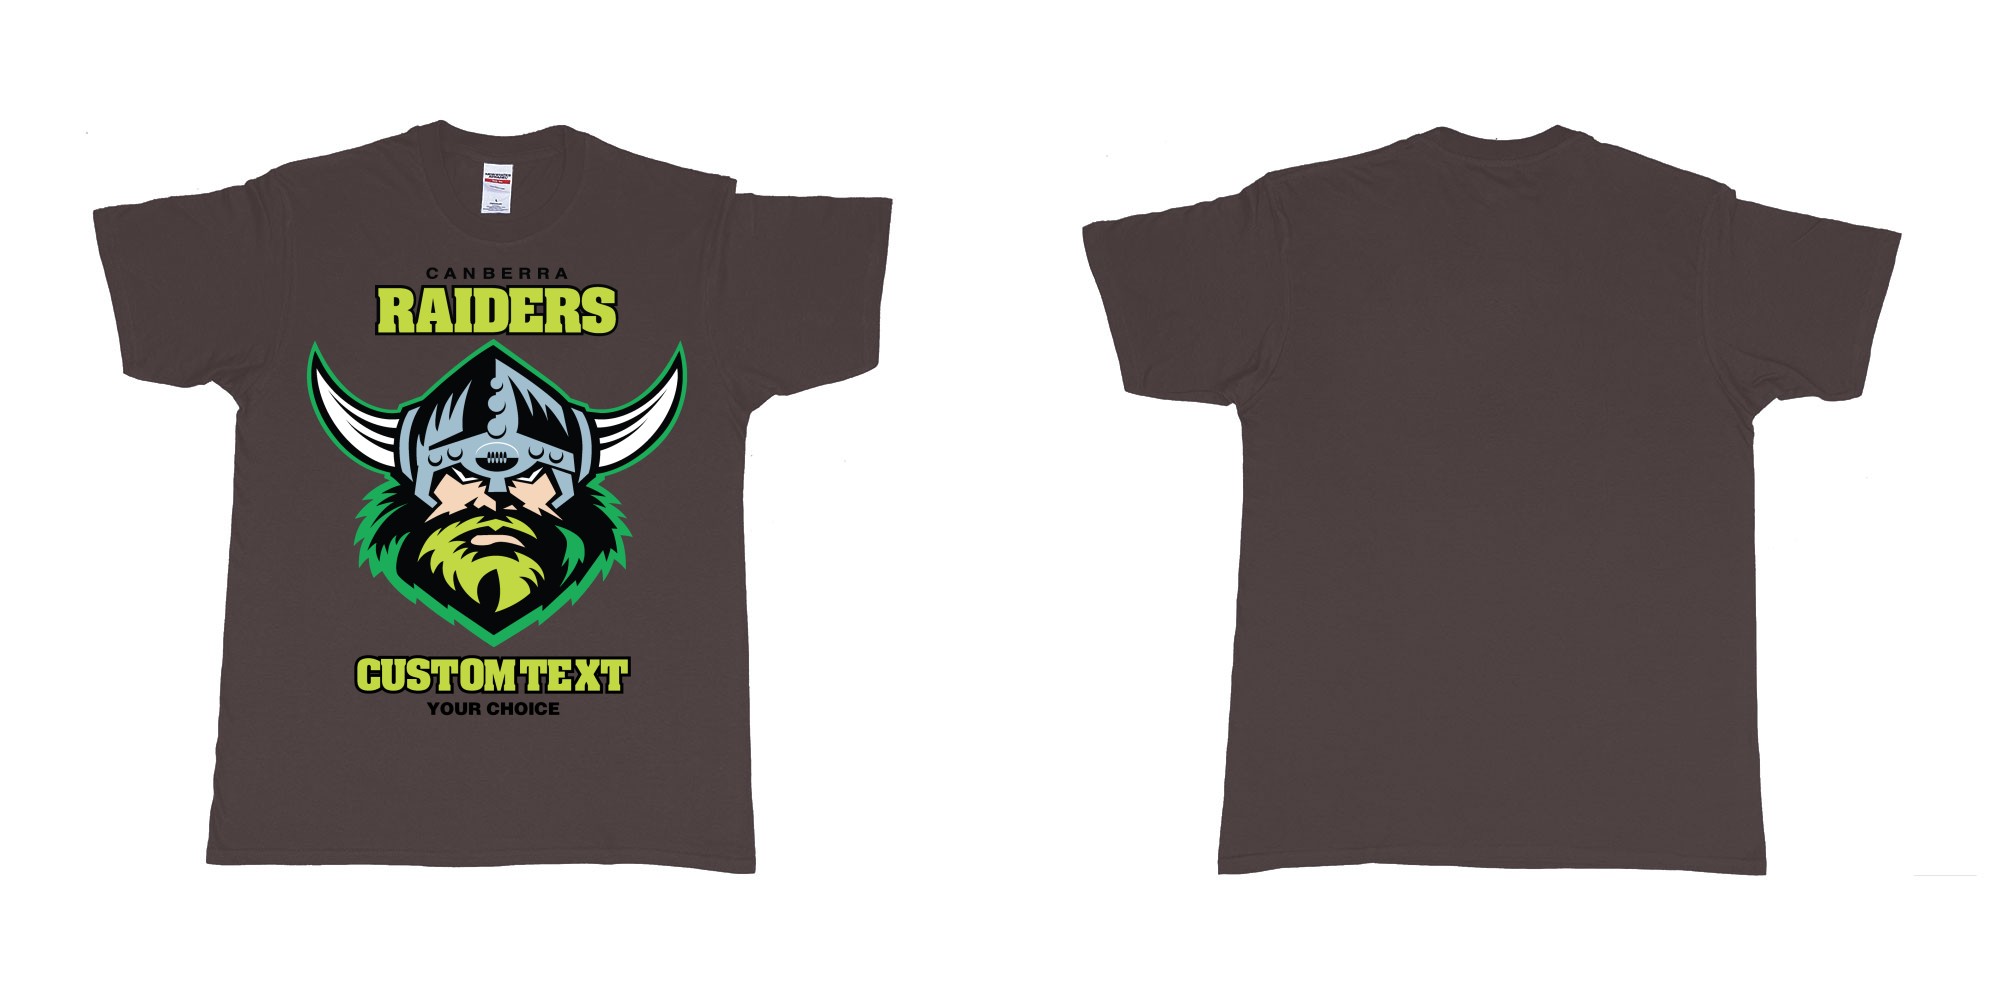 Custom tshirt design canberra raiders nrl logo own printed text near you in fabric color dark-chocolate choice your own text made in Bali by The Pirate Way